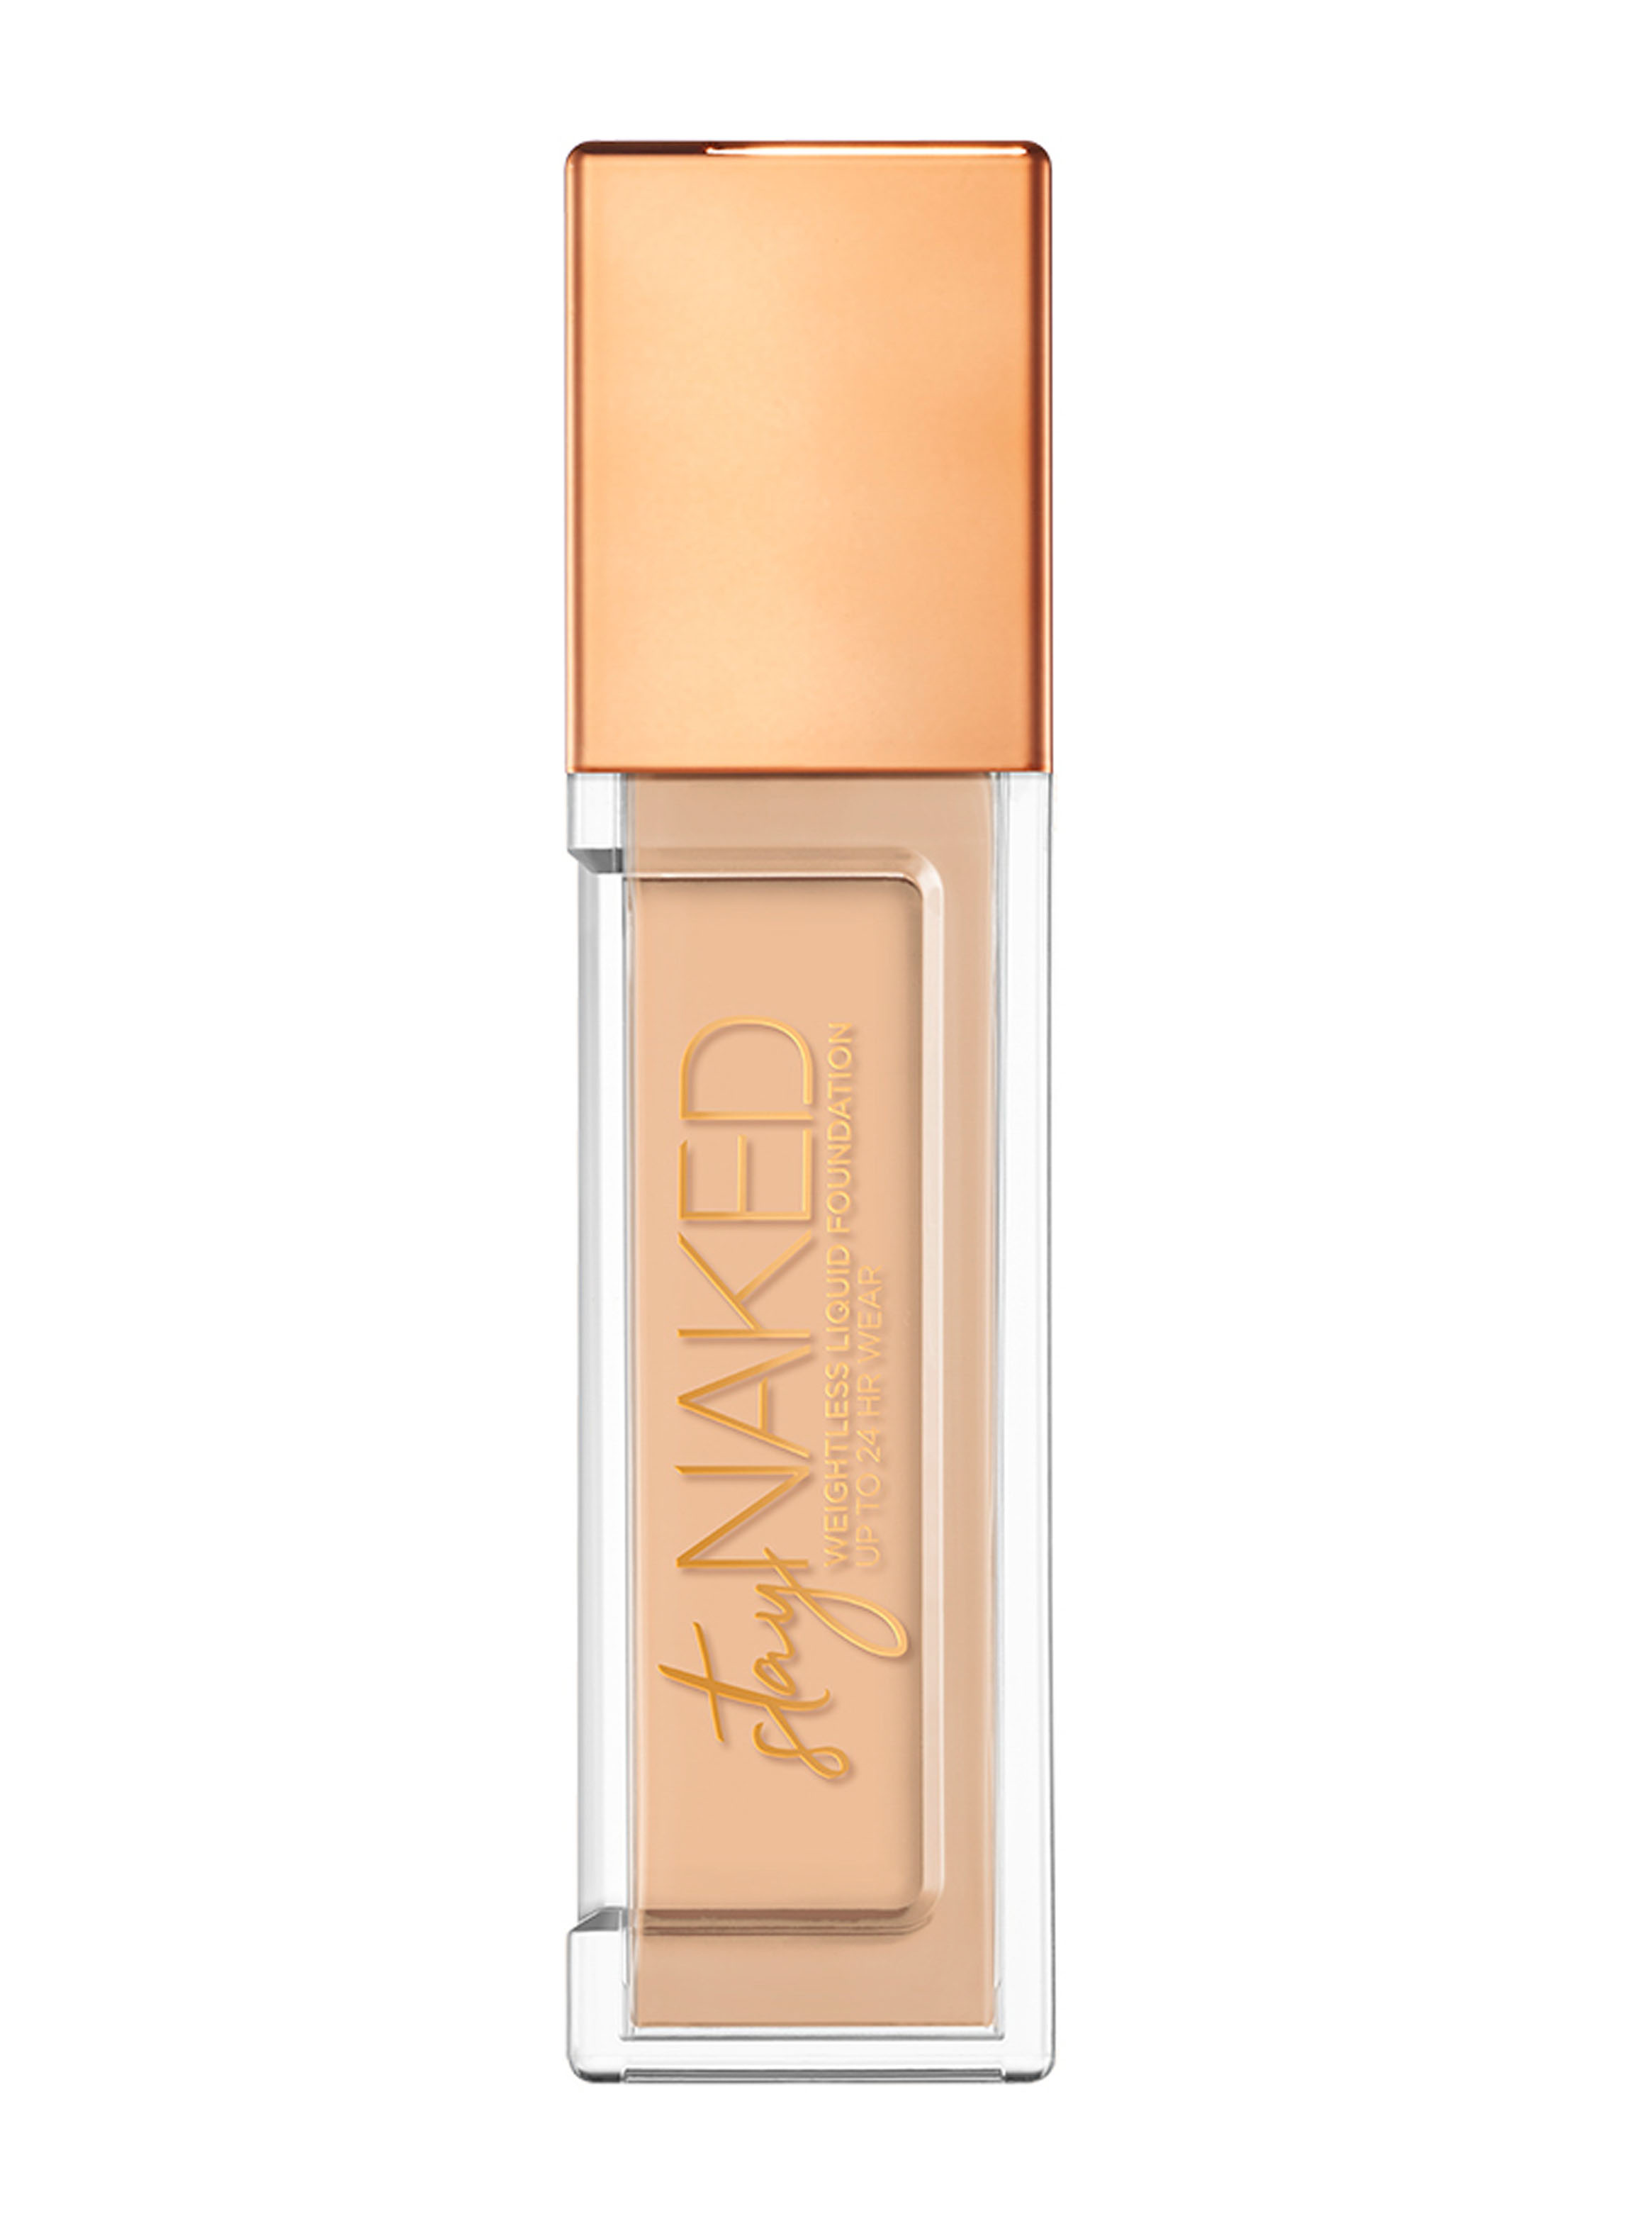 Base Maquillaje Stay Naked Foundation Urban Decay